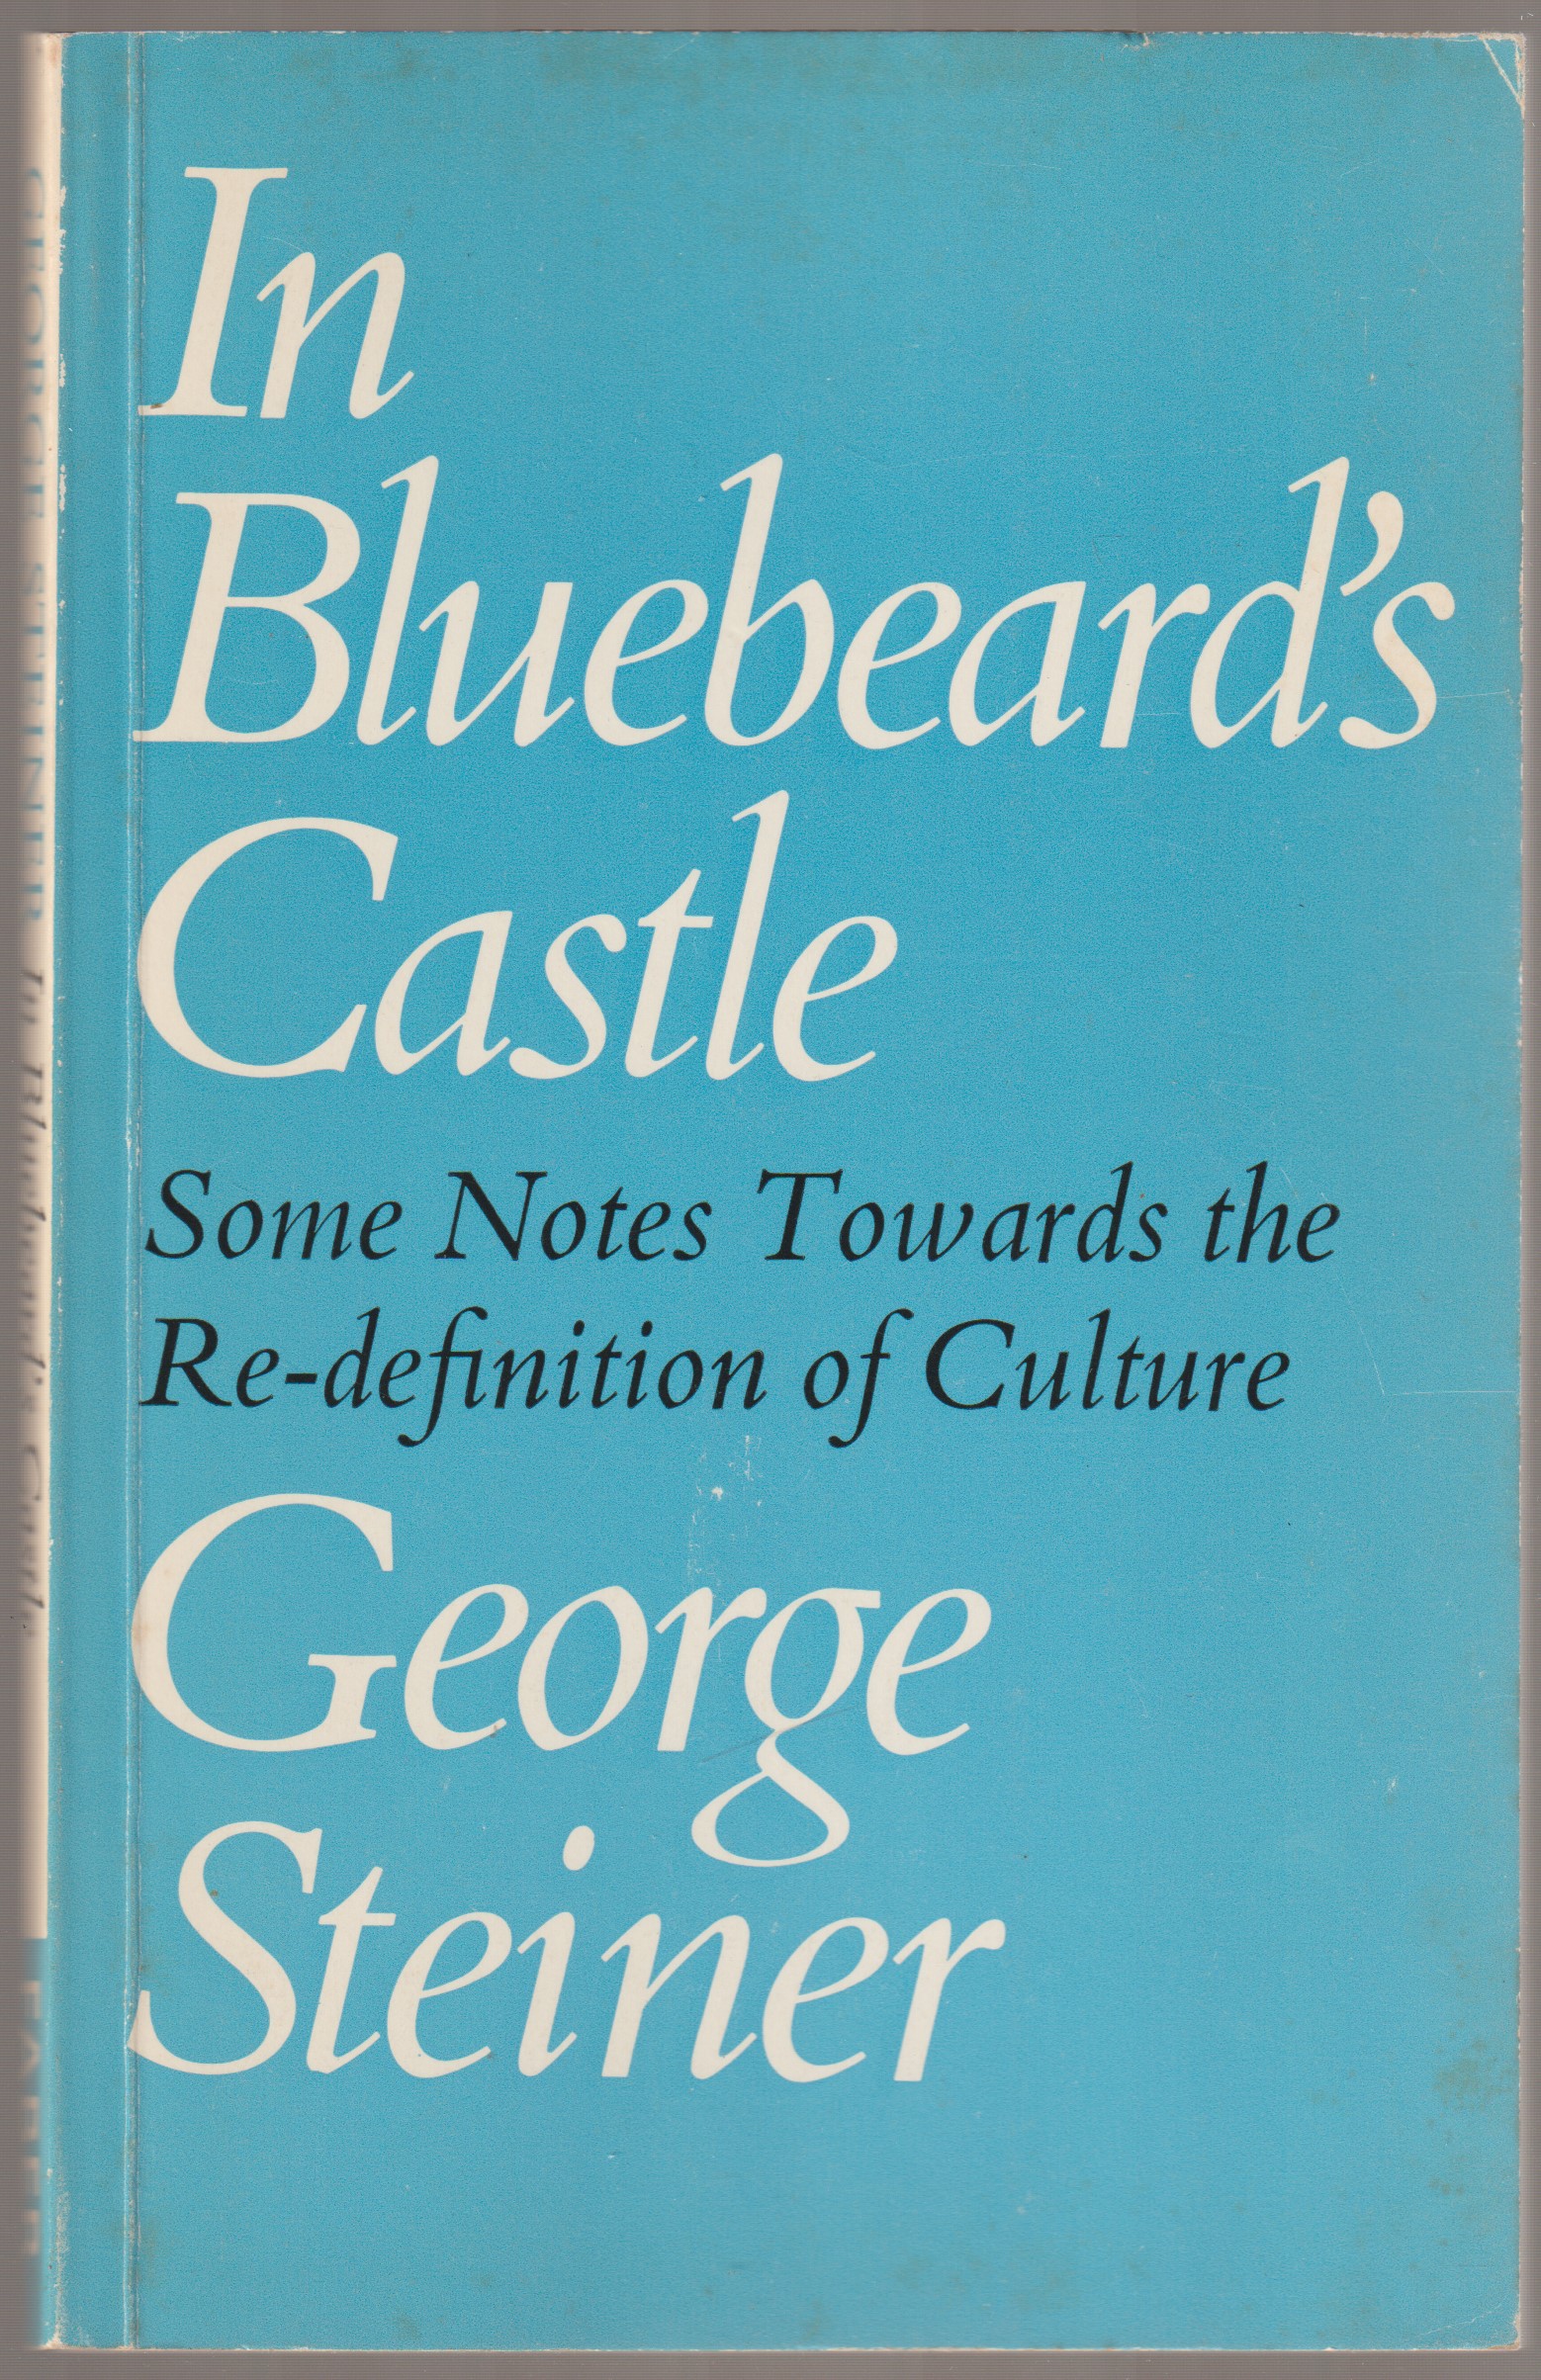 In Bluebeard's castle : some notes towards the re-definition of culture.